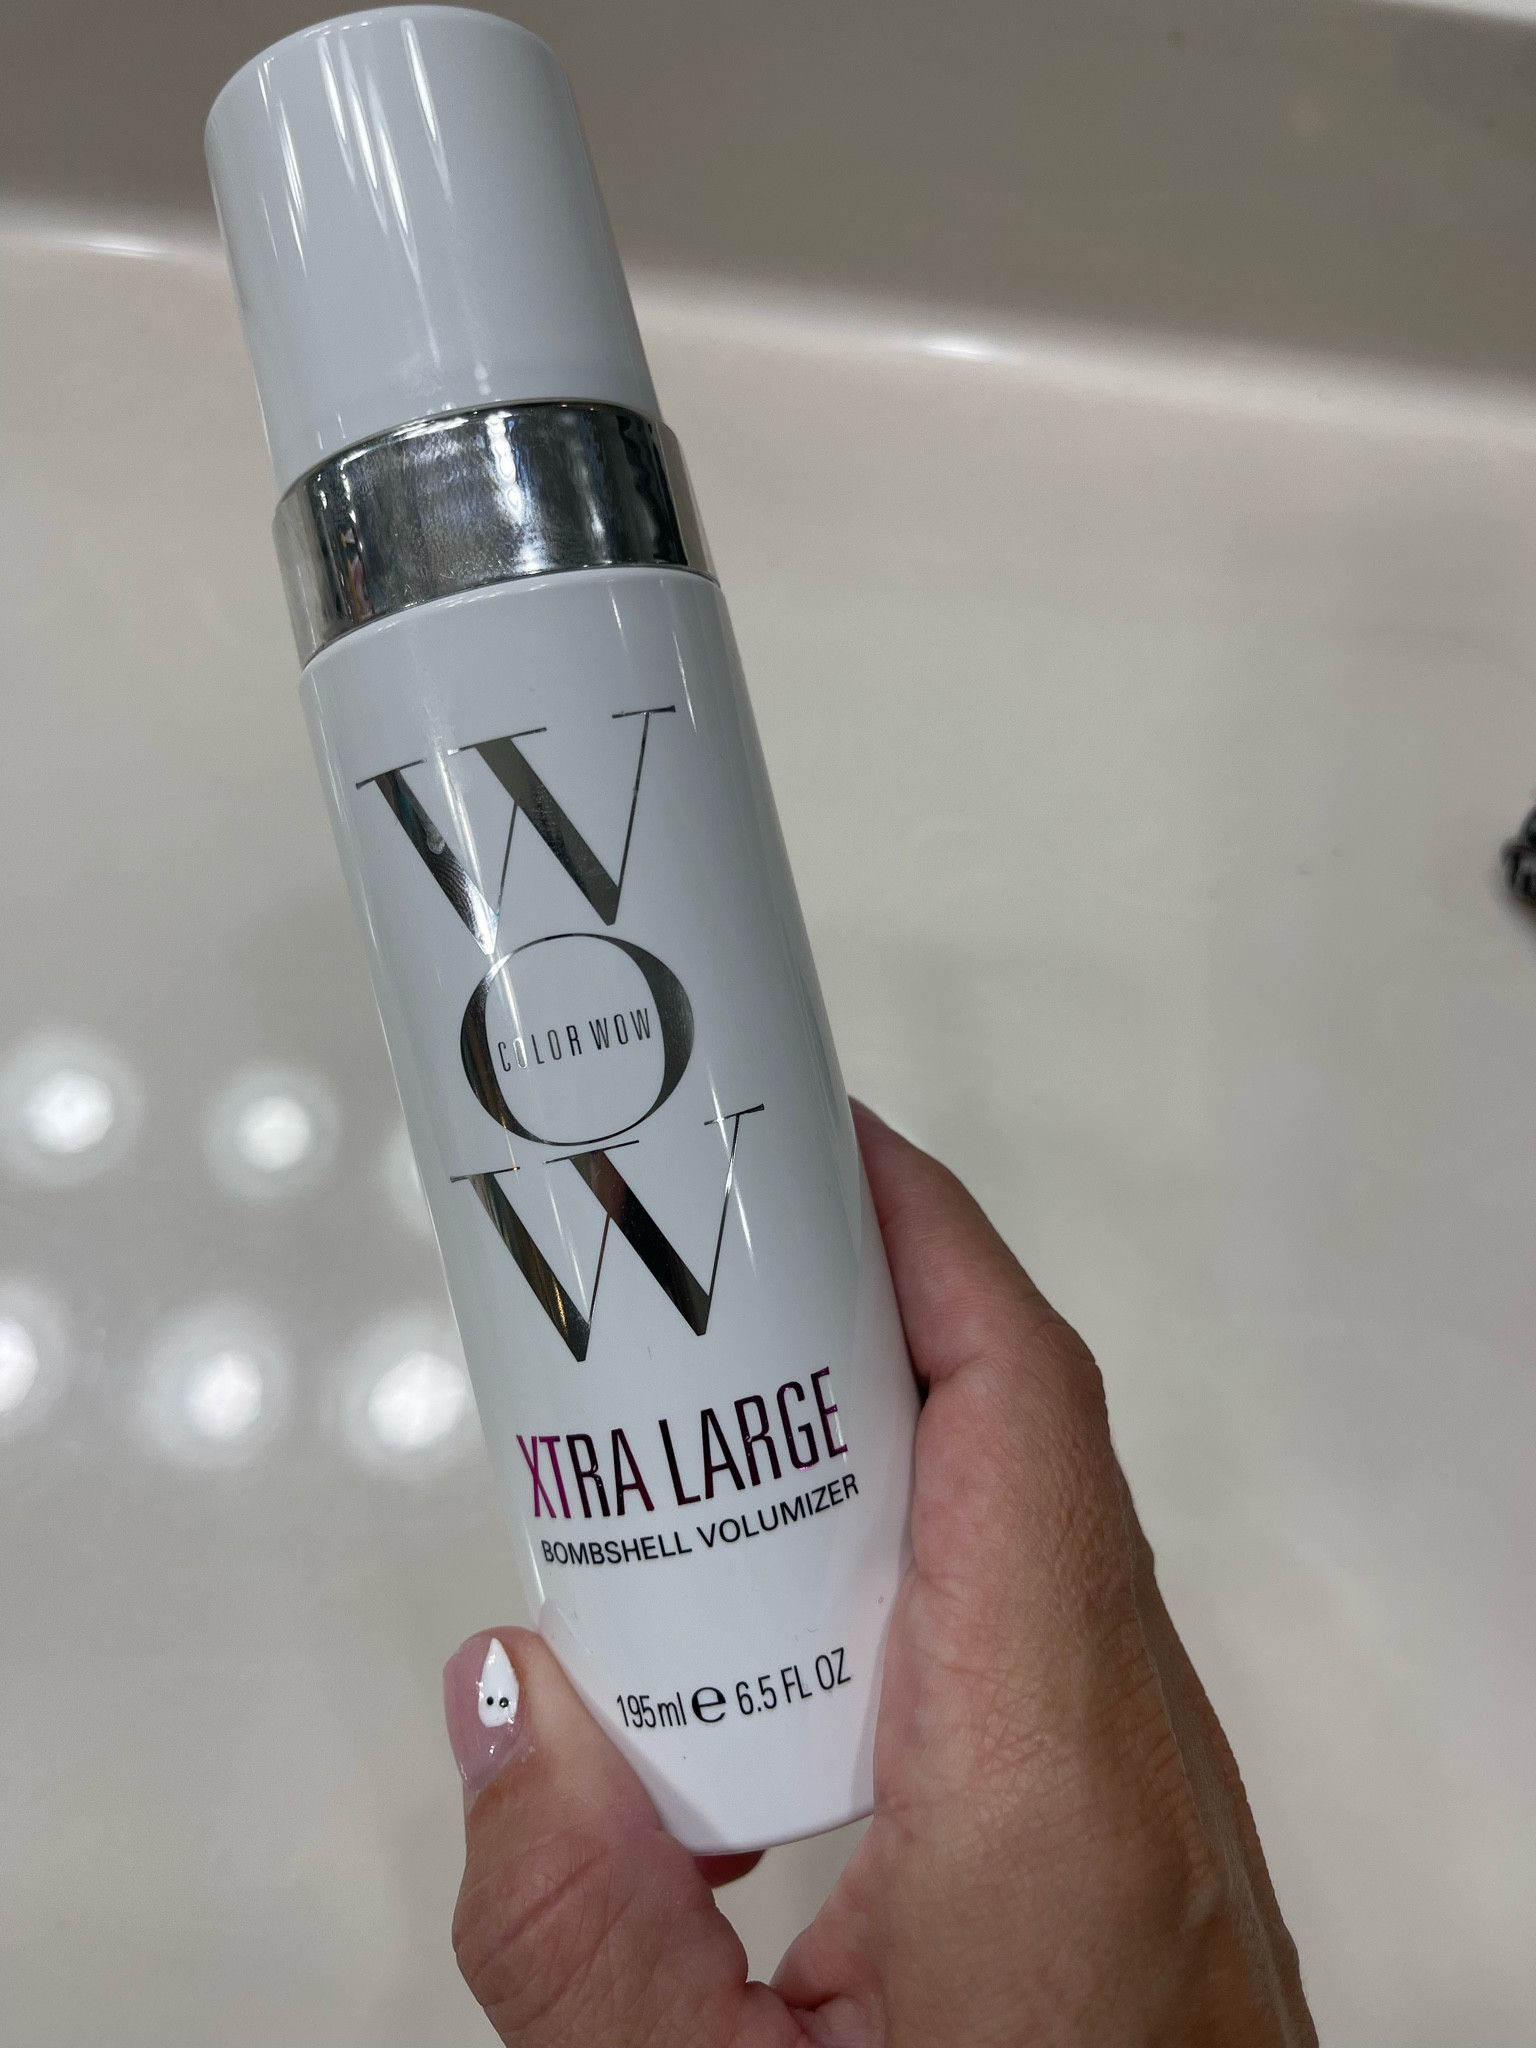 COLOR WOW Xtra Large Bombshell … curated on LTK